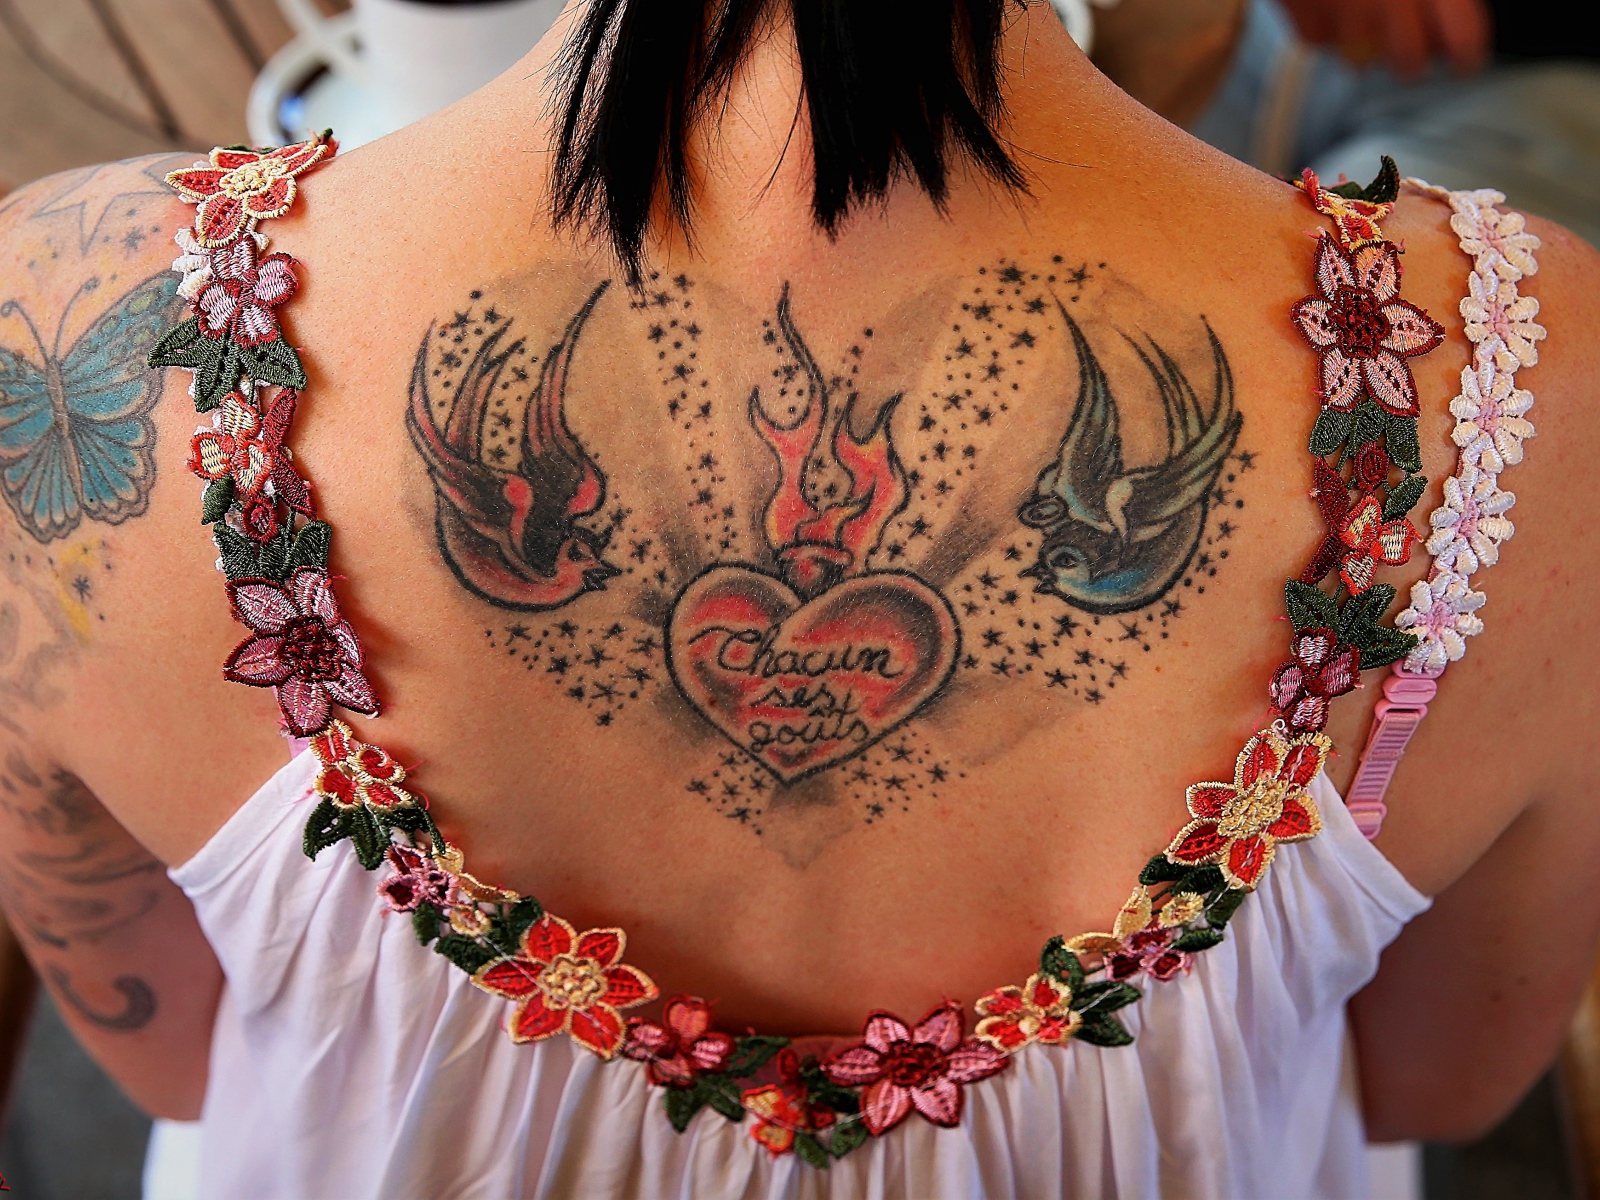 Large tattoo on the back of a girl in a white dress